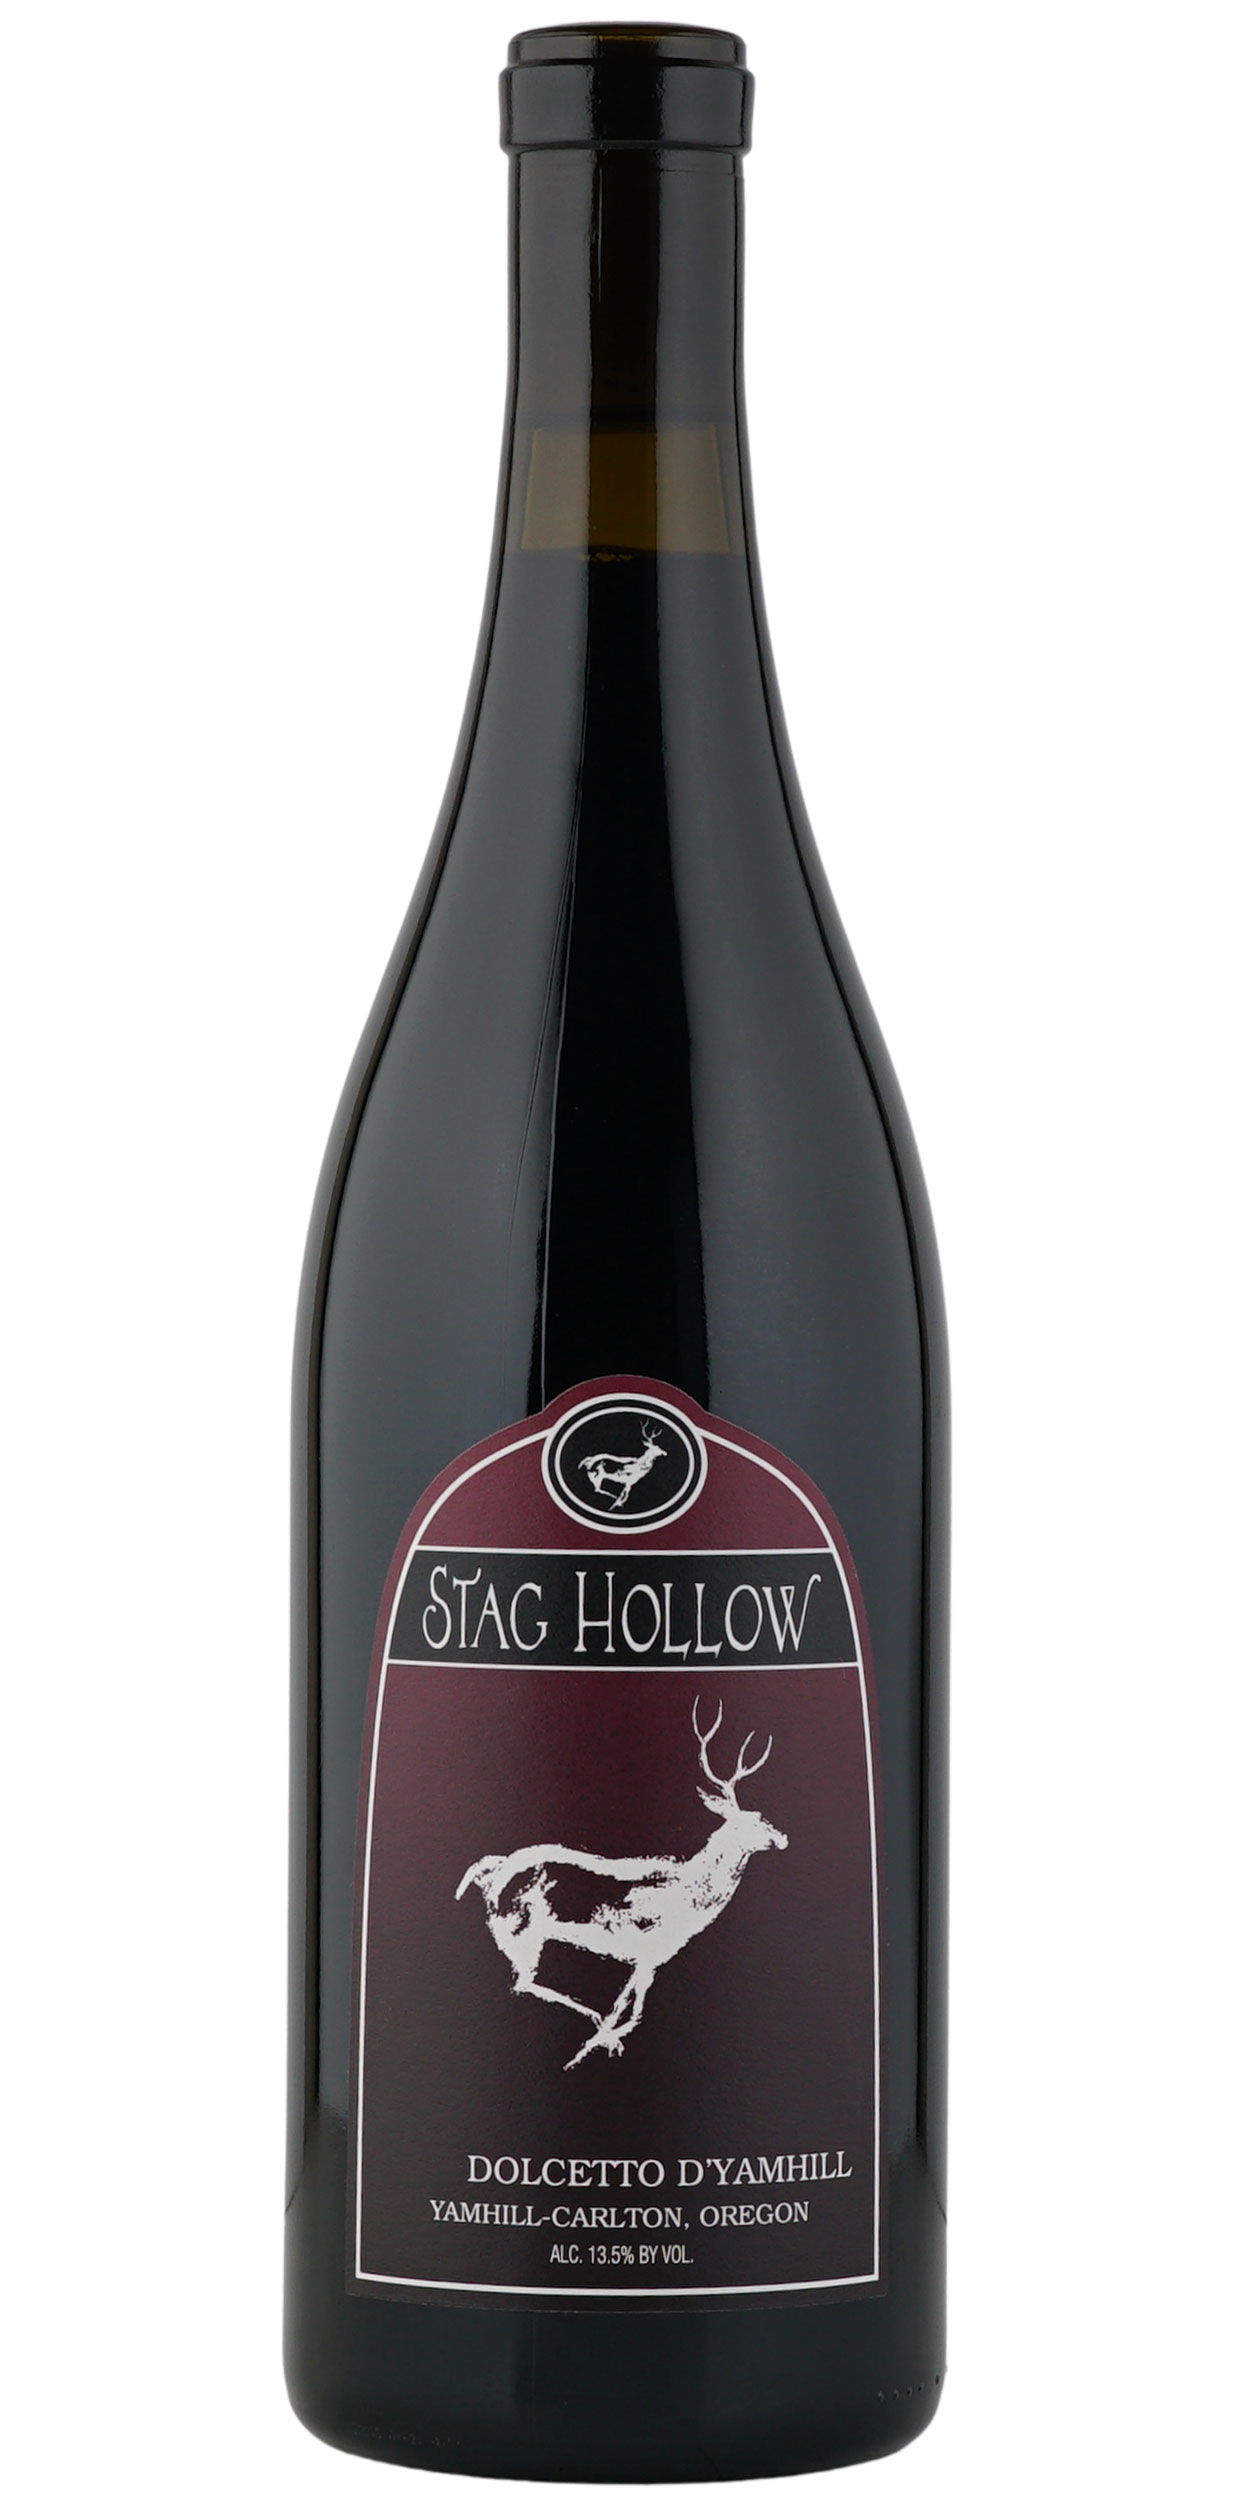 Bottle of Stag Hollow Dolcetto D'Yamhill